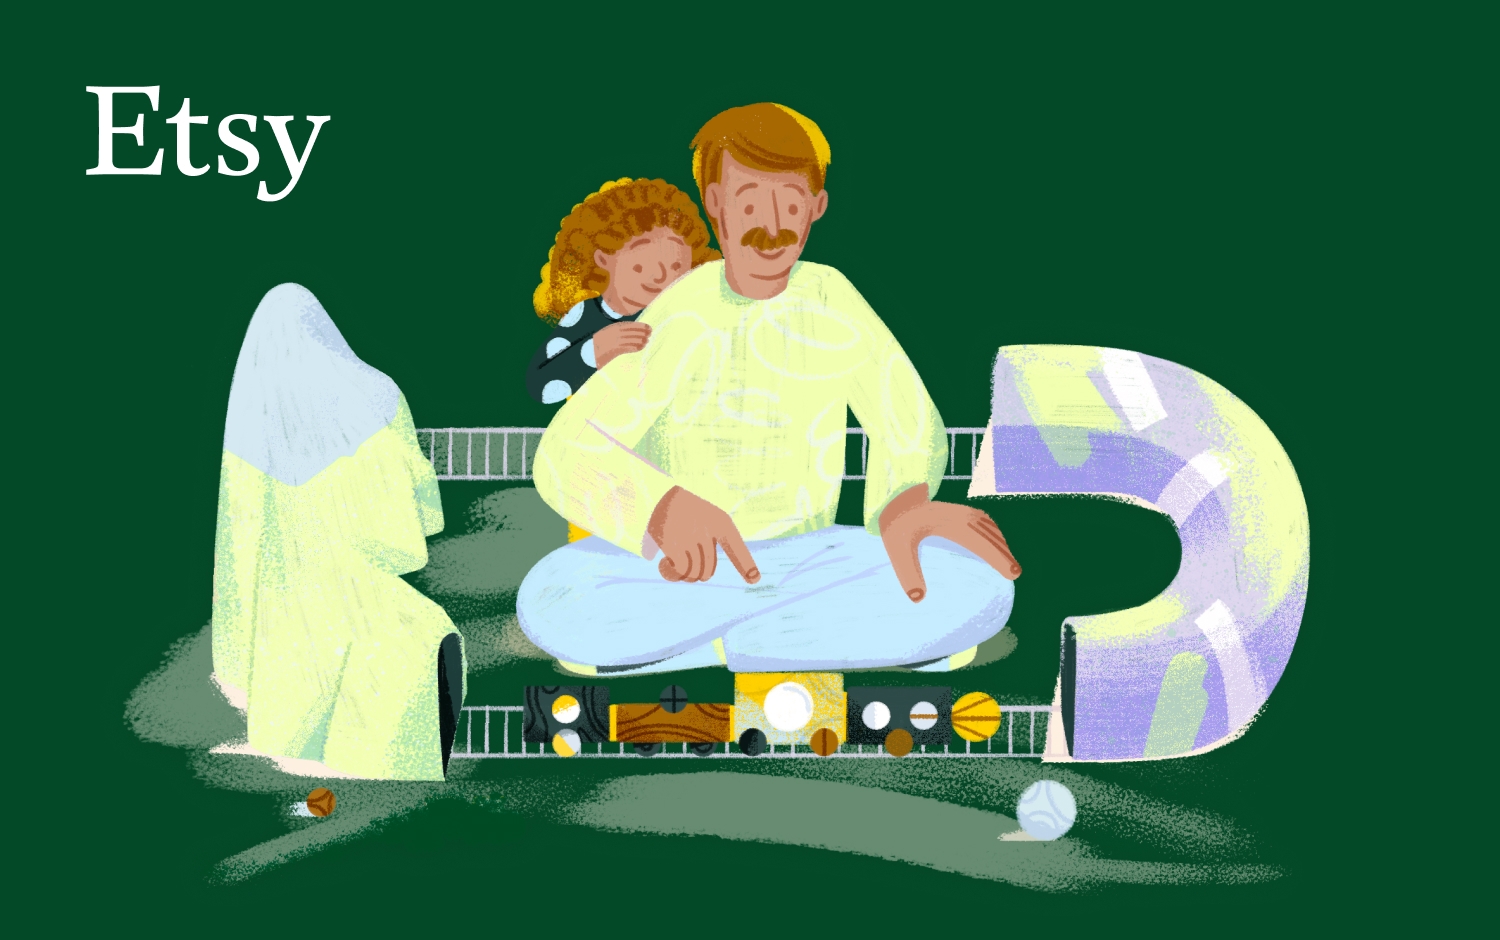 Illustration of a man with a mustache and a child with curly hair, sitting together on a green floor. The man is wearing a white shirt and light blue trousers, and the child is leaning on his back, wearing a black and white outfit. They are surrounded by various toys, including a toy train set weaving through a tunnel and past mountains, and a toy ball. The scene is set against a dark green background with the Etsy logo in white font in the top left corner